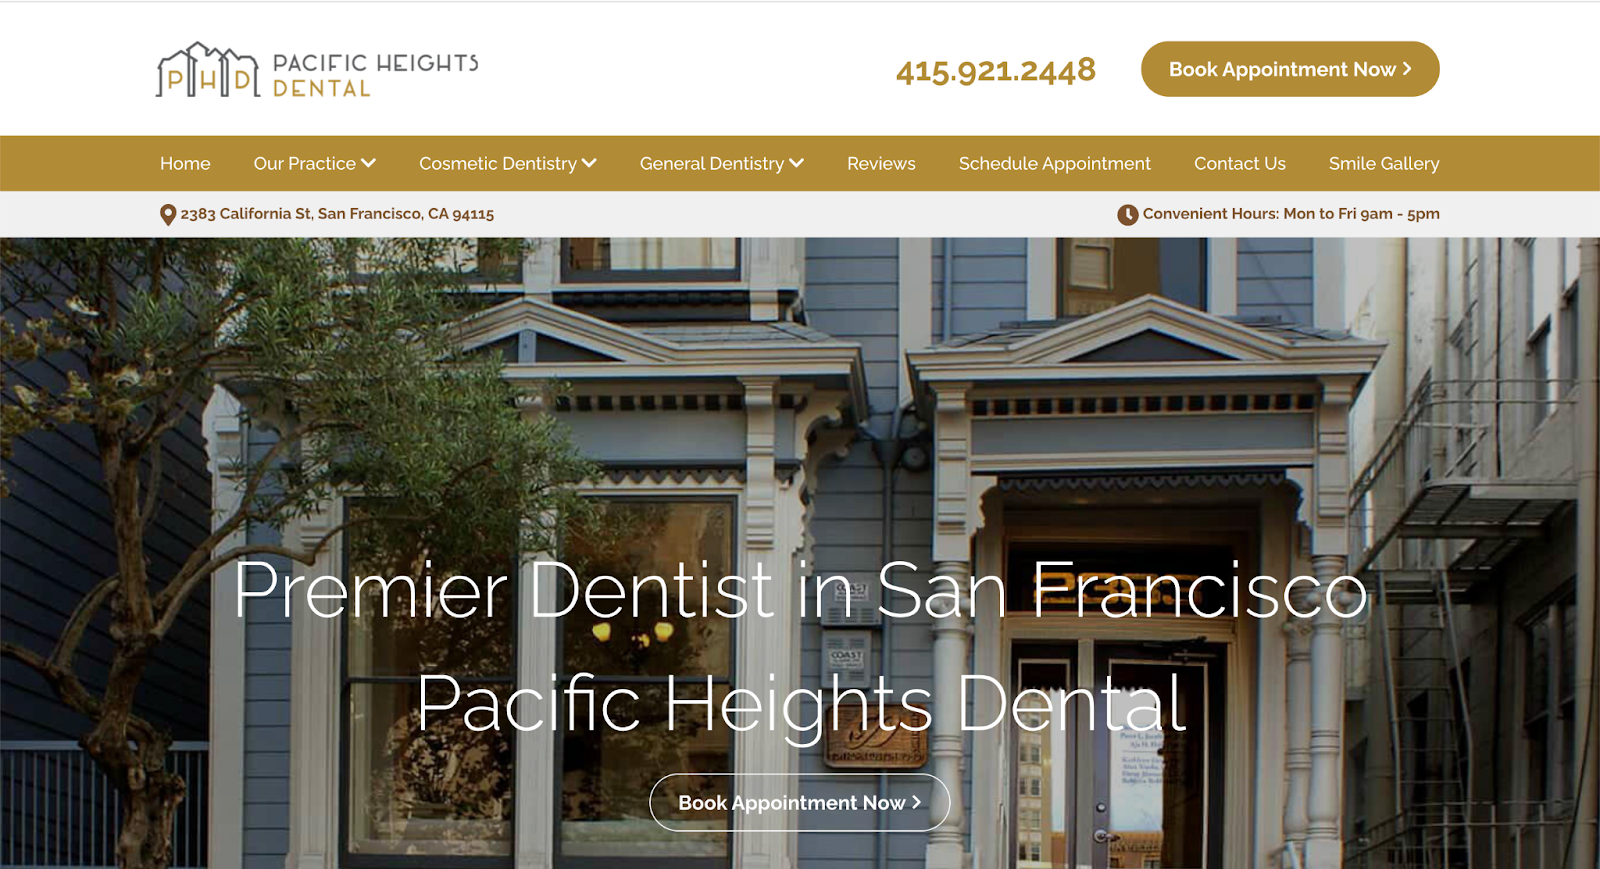 Get inspiration from the Pacific Heights Dental website design for your next dental website